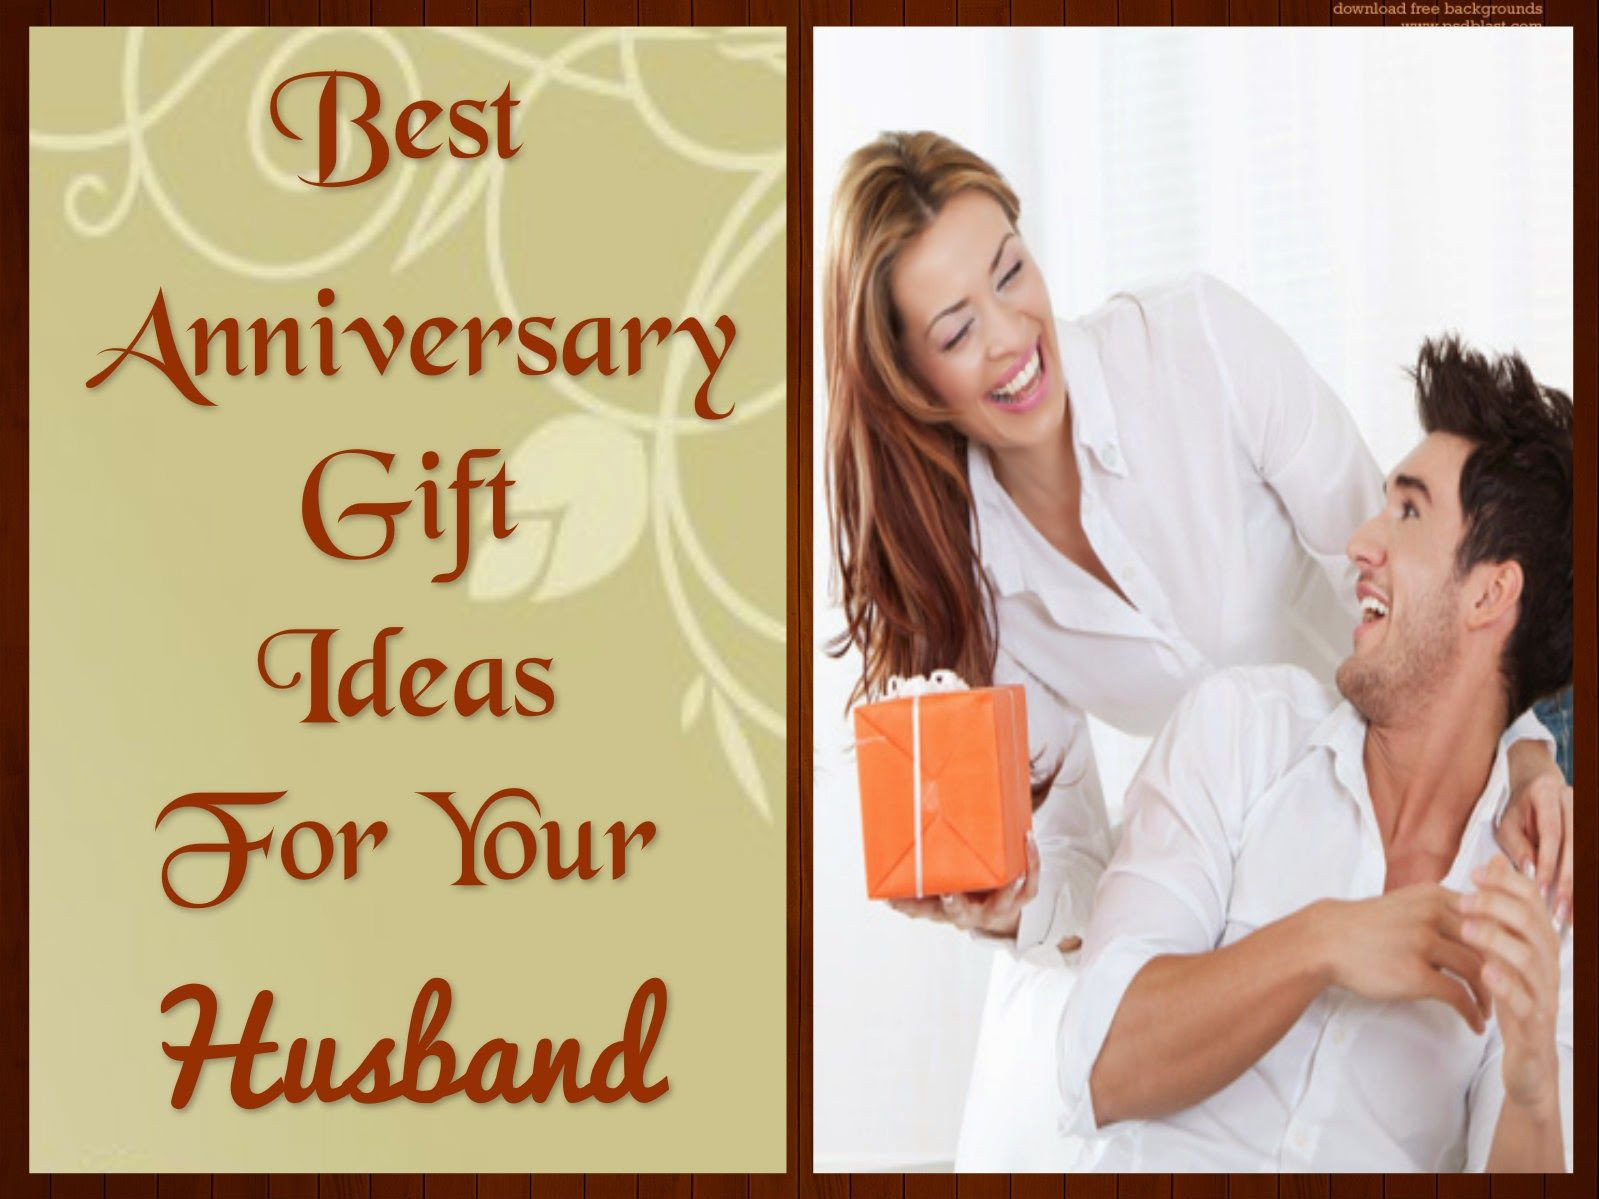 30Th Wedding Anniversary Gift Ideas For Husband
 Wedding Anniversary Gifts Best Anniversary Gift Ideas For